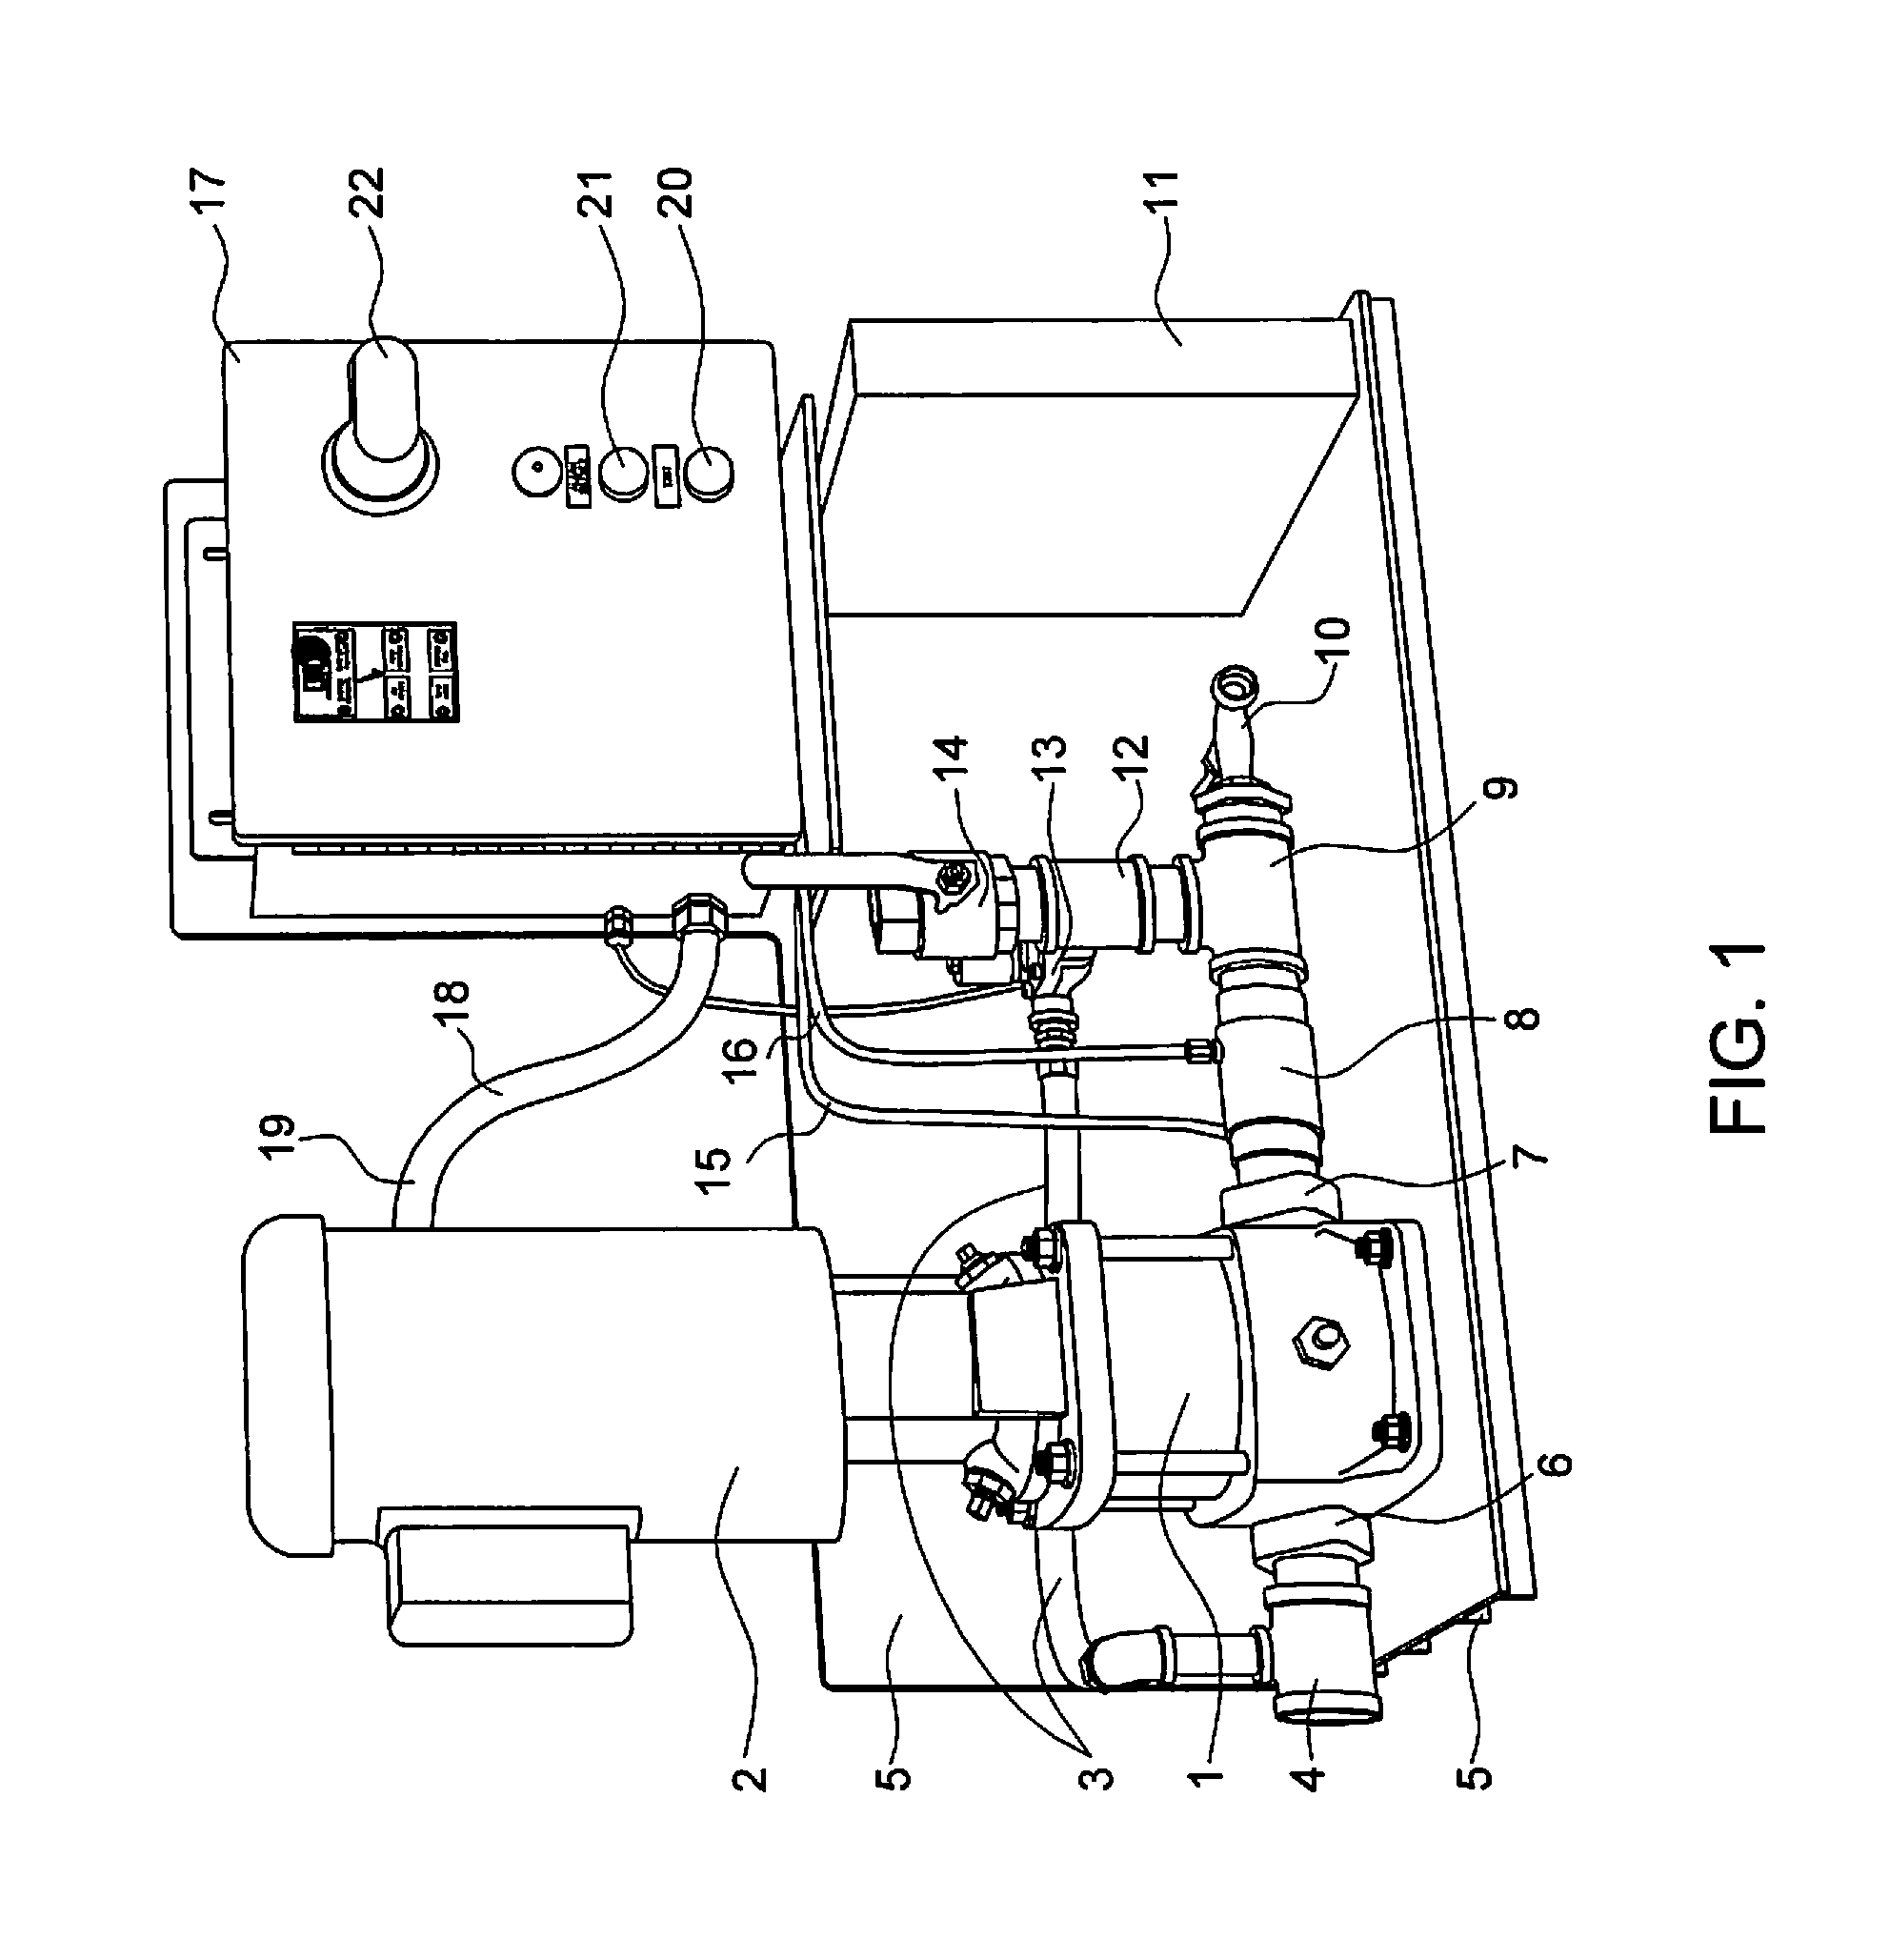 Self-testing and self-calibrating fire sprinkler system, method of installation and method of use